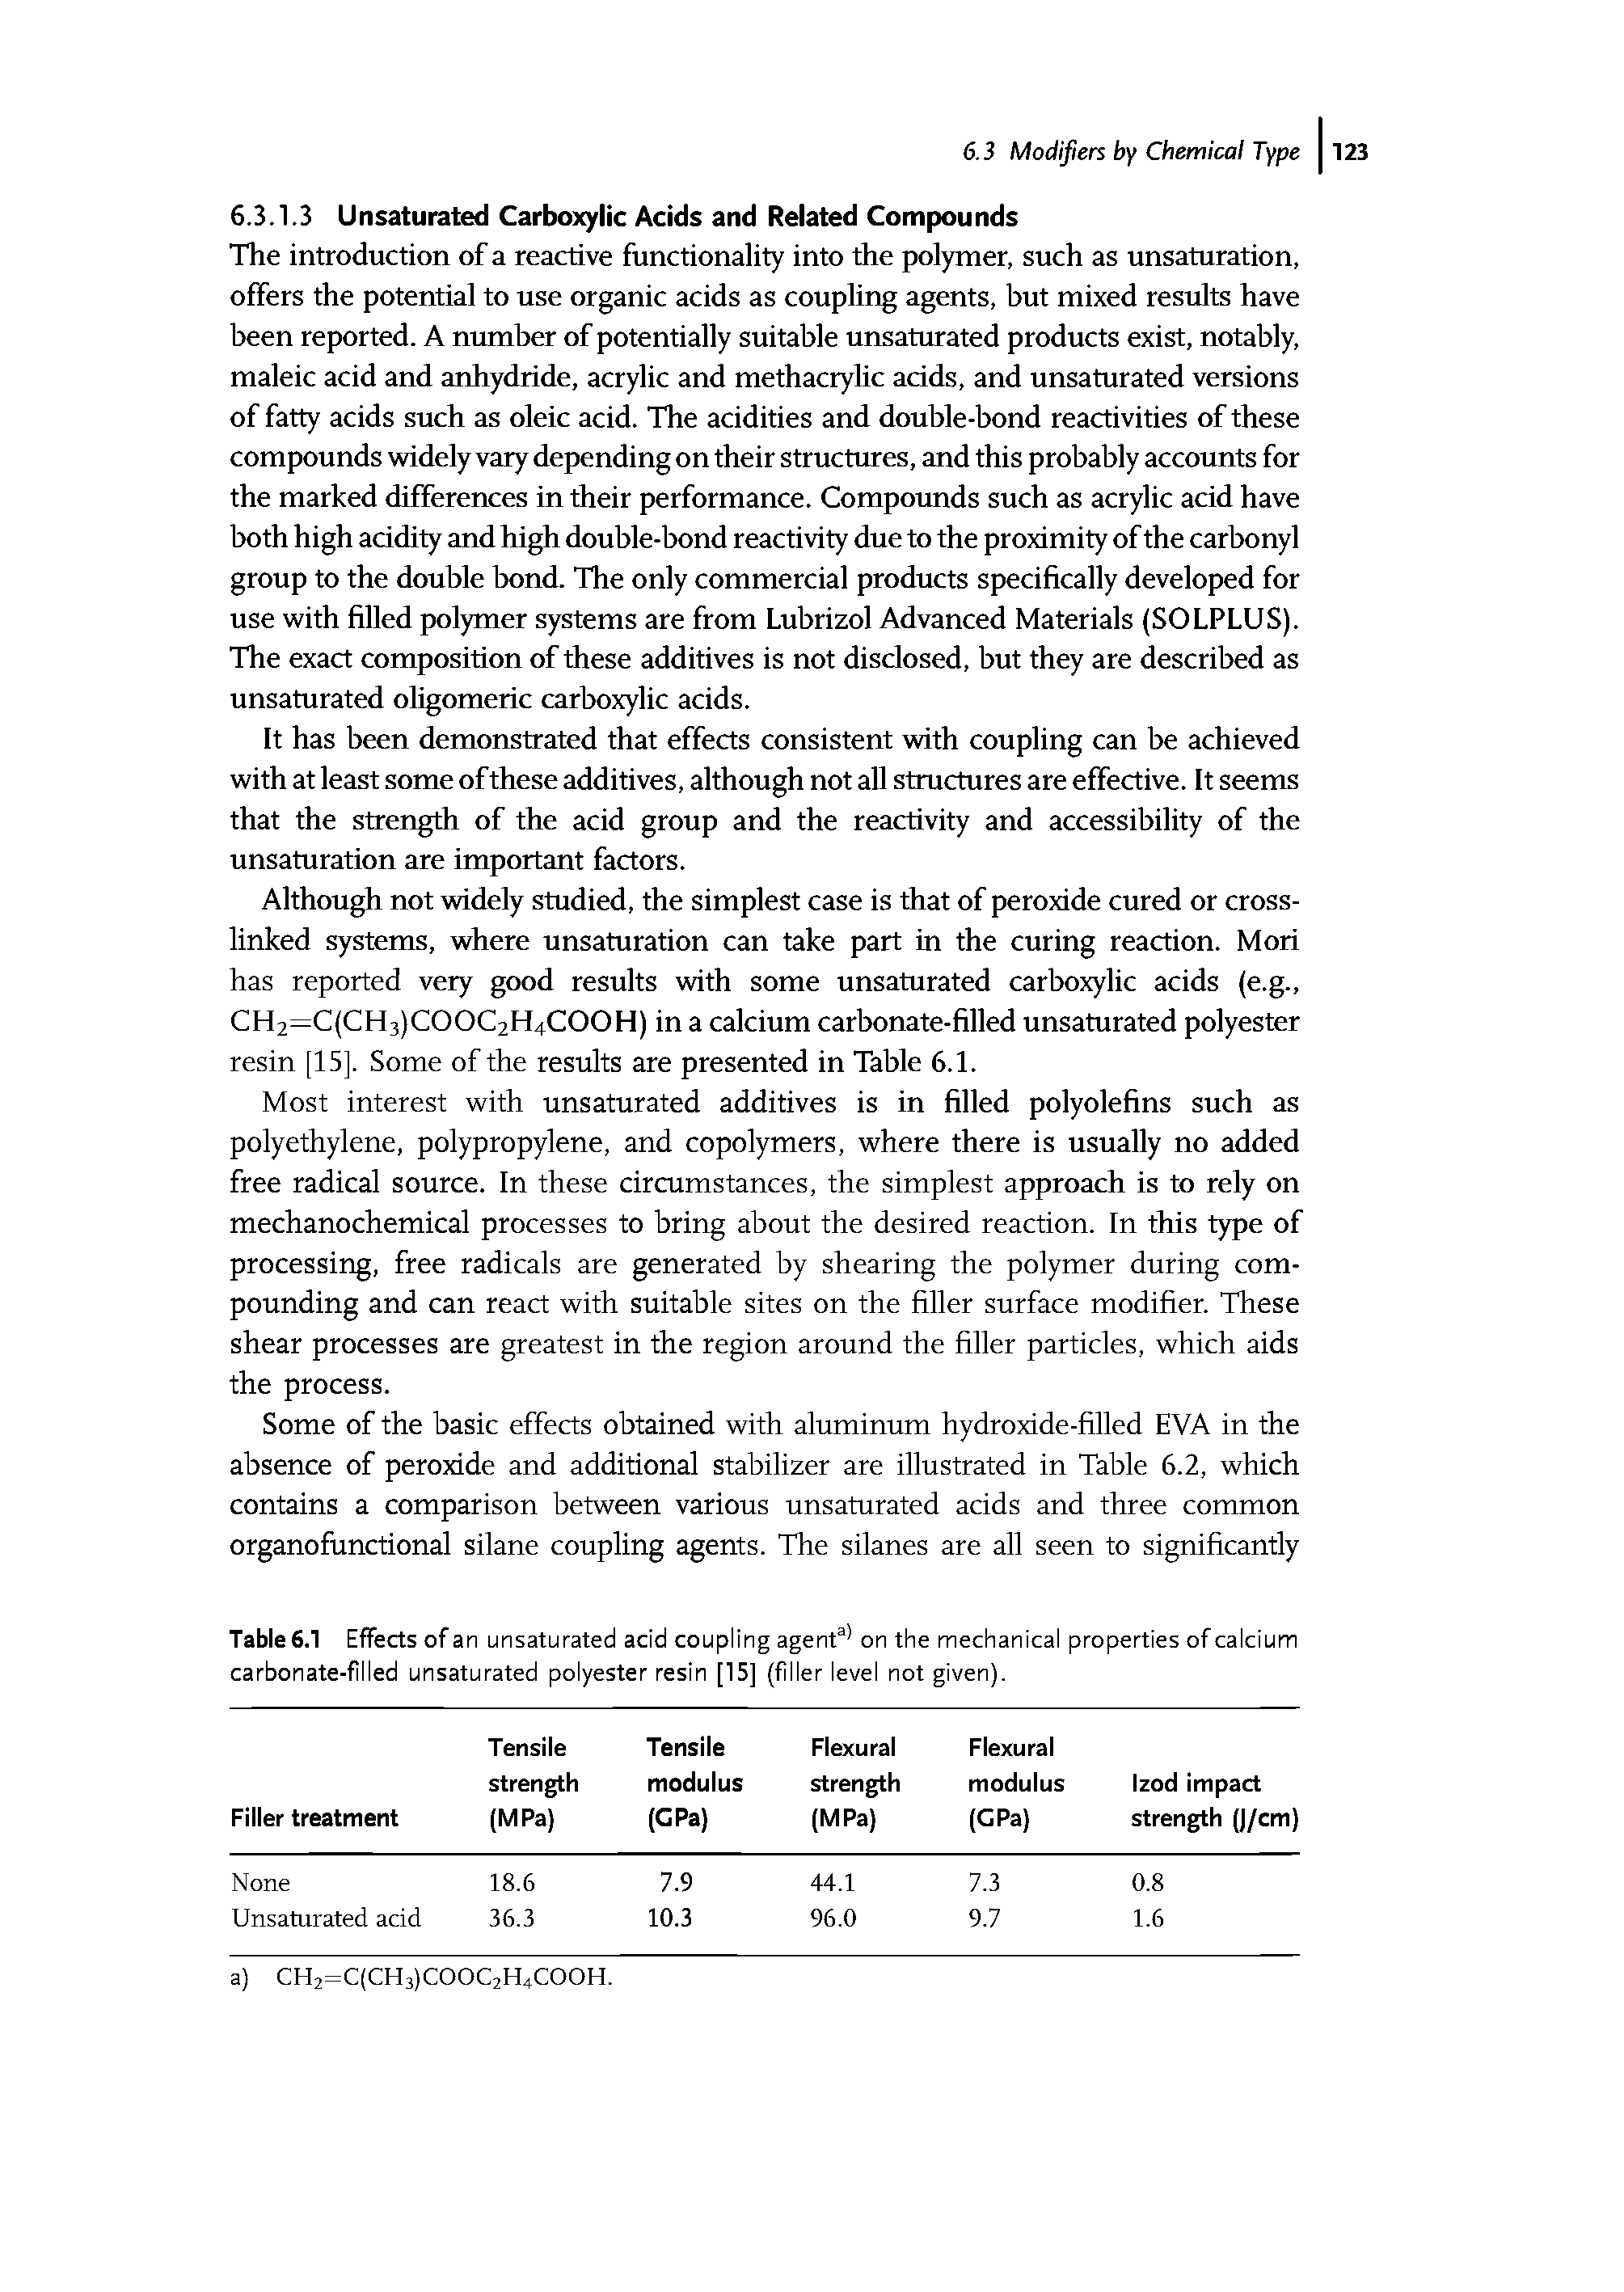 Table 6.1 Effects of an unsaturated acid coupling agent on the mechanical properties of calcium carbonate-filled unsaturated polyester resin [15] (filler level not given).